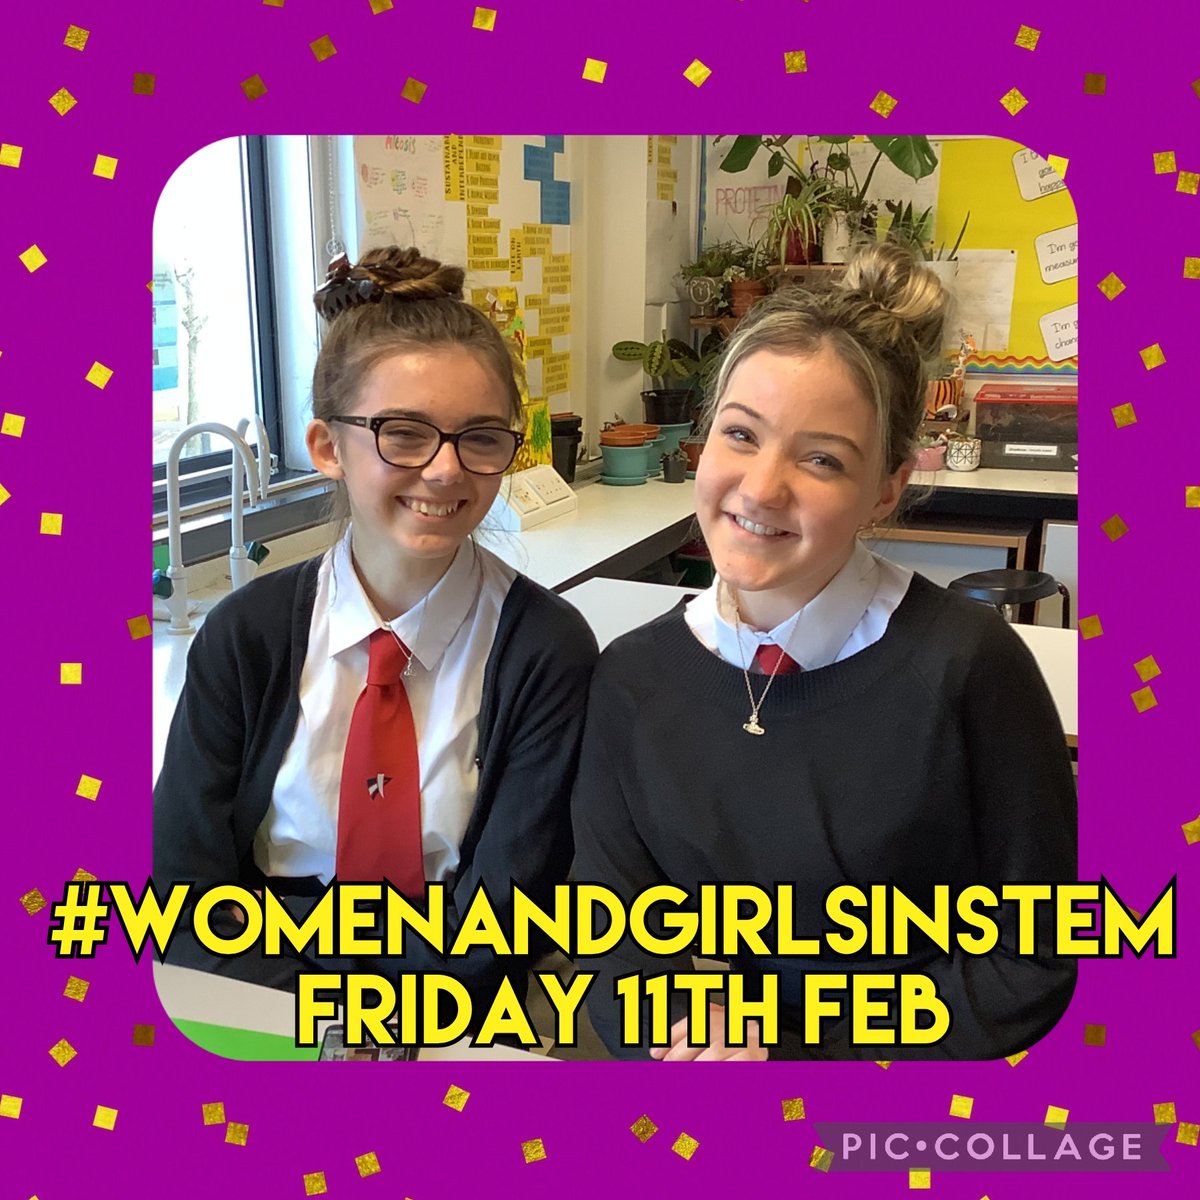 For today's #WomenAndGirlsInSTEM, we are celebrating two of the most inspiring STEMinist we know! Our fabulous Junior Young STEM Leaders Kayleigh & Rebecca. Always bursting with STEM enthusiasm & two of the best STEM role models we know! @Braes_STEM  @BraesHigh  @YoungSTEMLeader